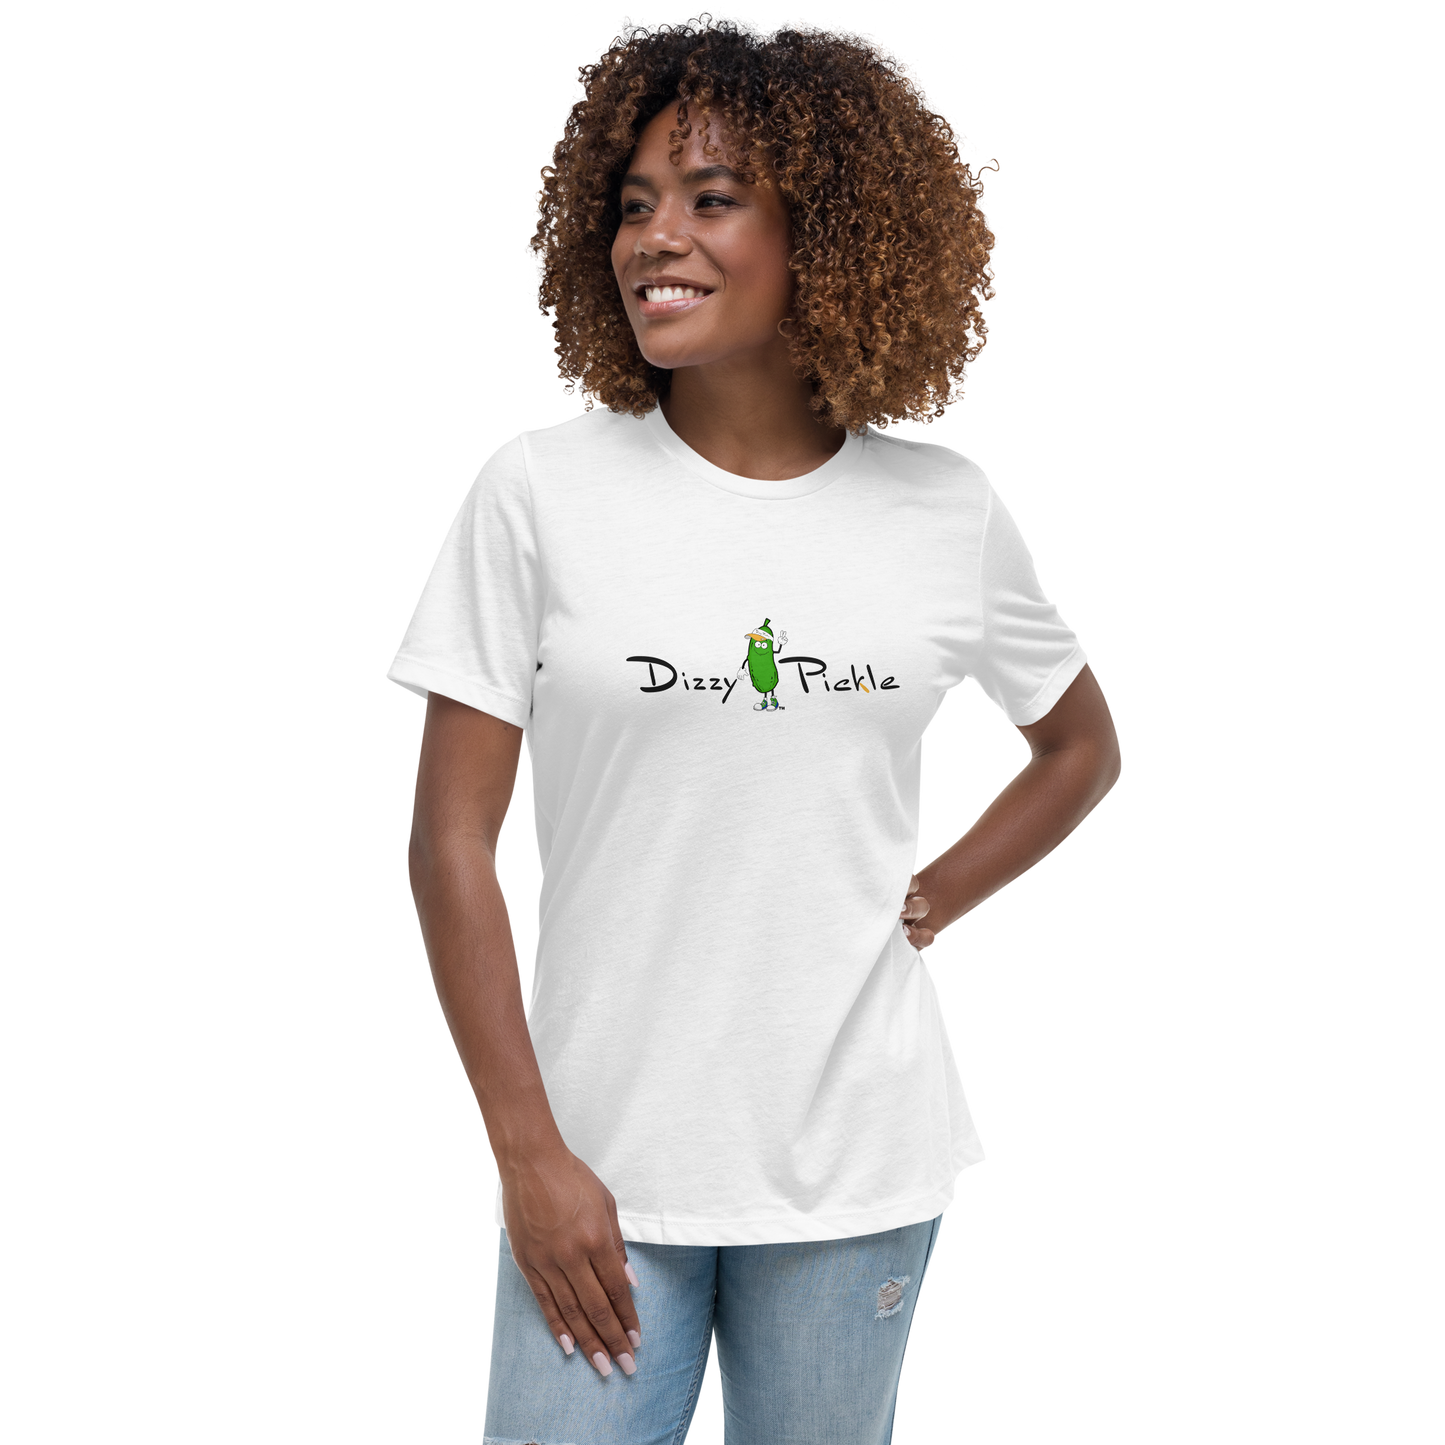 DZY P Classic - Women's Relaxed T-Shirt by Dizzy Pickle v2